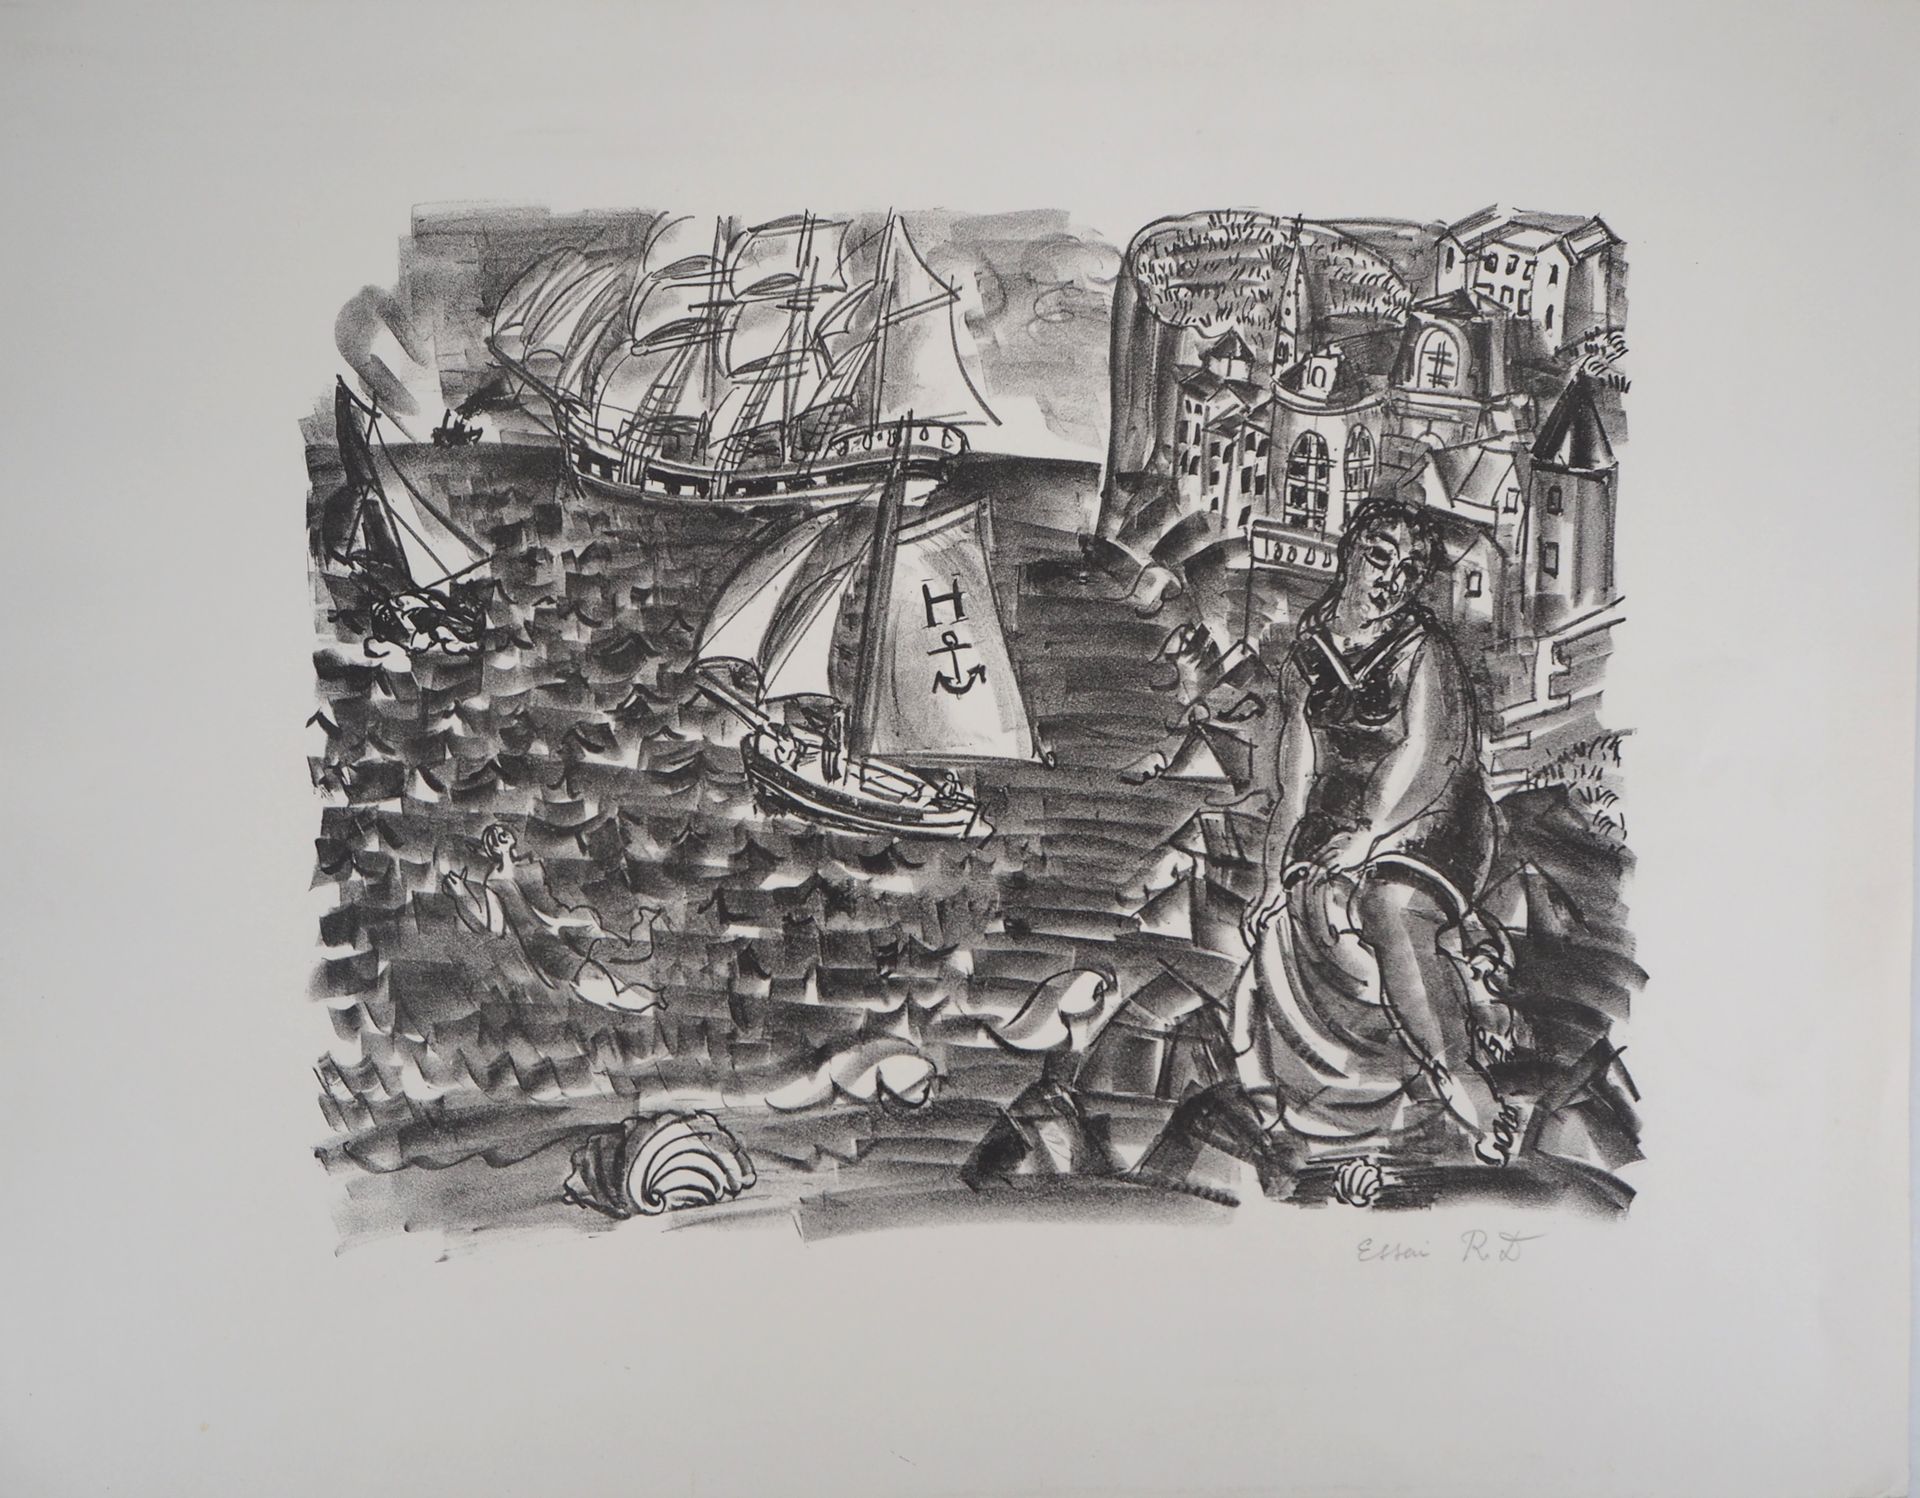 Raoul Dufy Raoul DUFY

Der Badende

Original-Lithographie

Mit Bleistift signier&hellip;